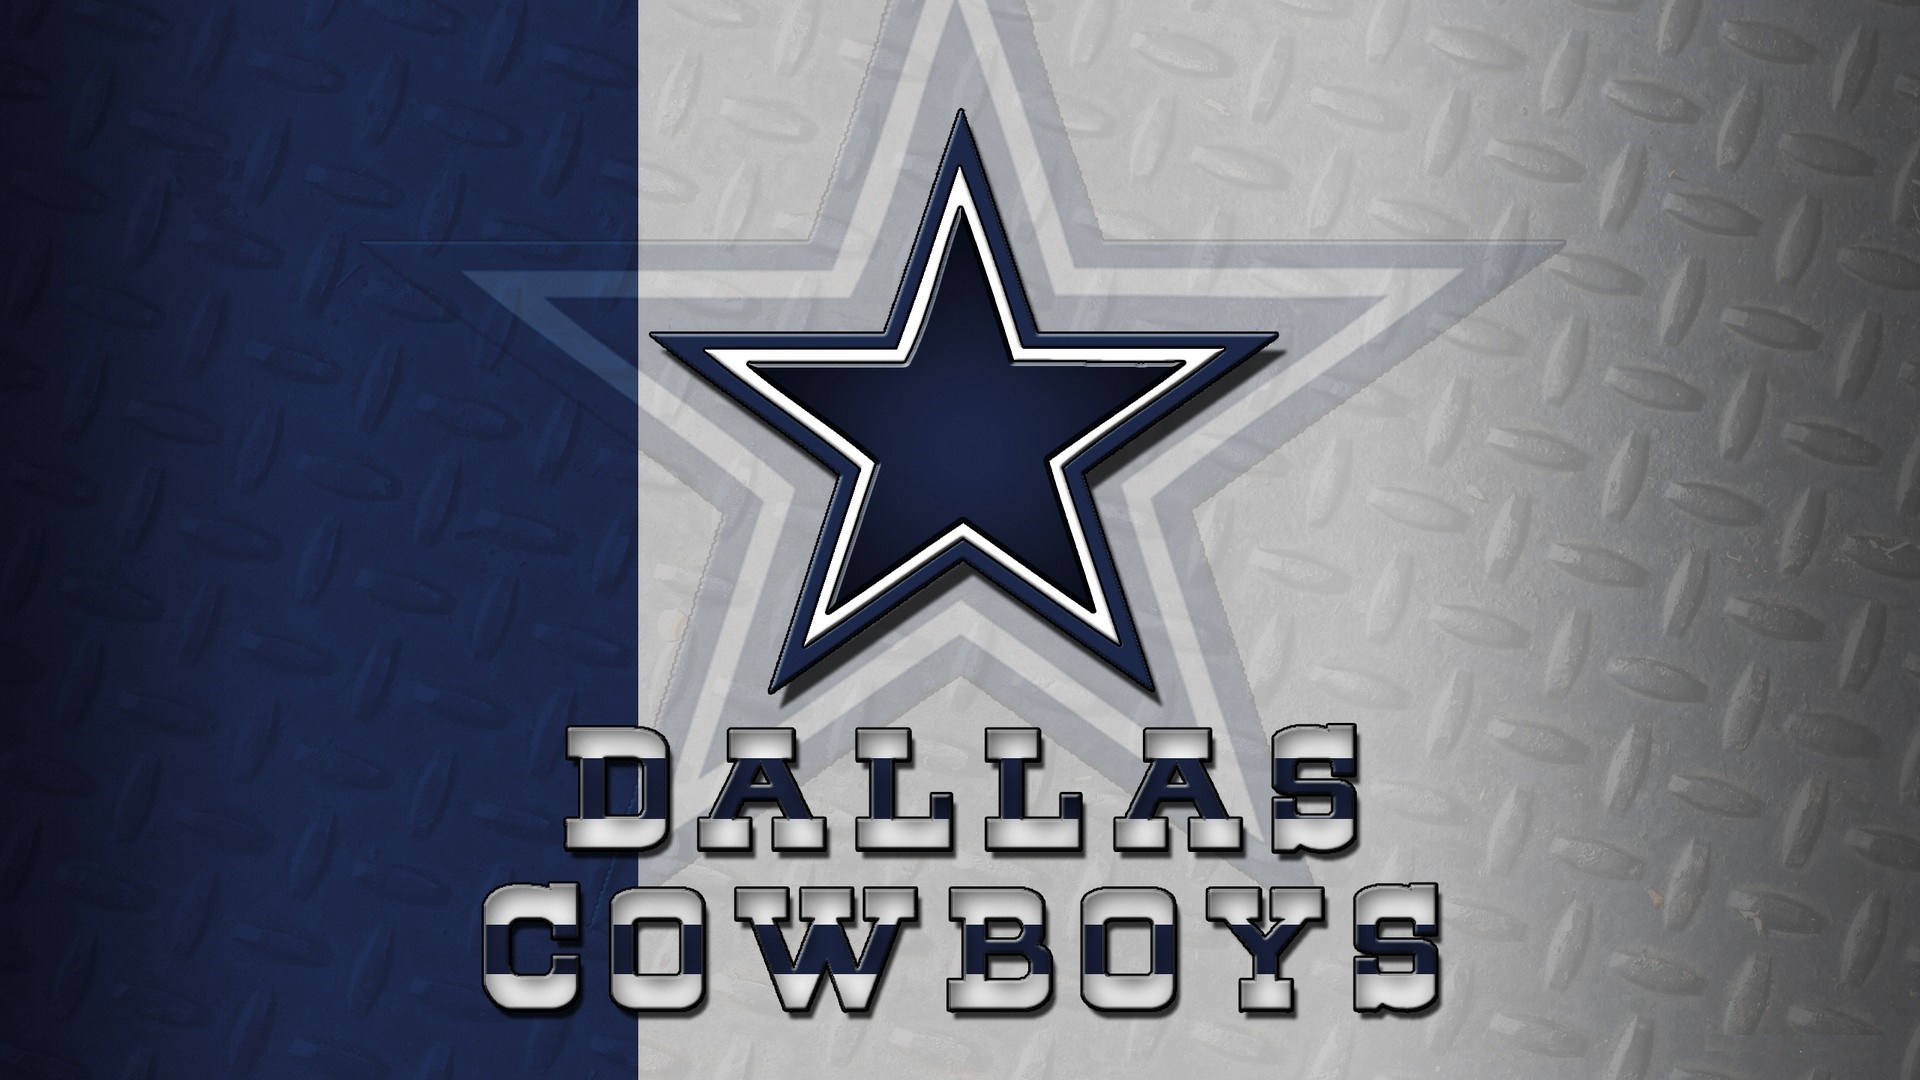 Dallas Cowboys Wallpaper in HD with high-resolution 1920x1080 pixel. Download and set as wallpaper for Desktop Computer, Apple iPhone X, XS Max, XR, 8, 7, 6, SE, iPad, Android